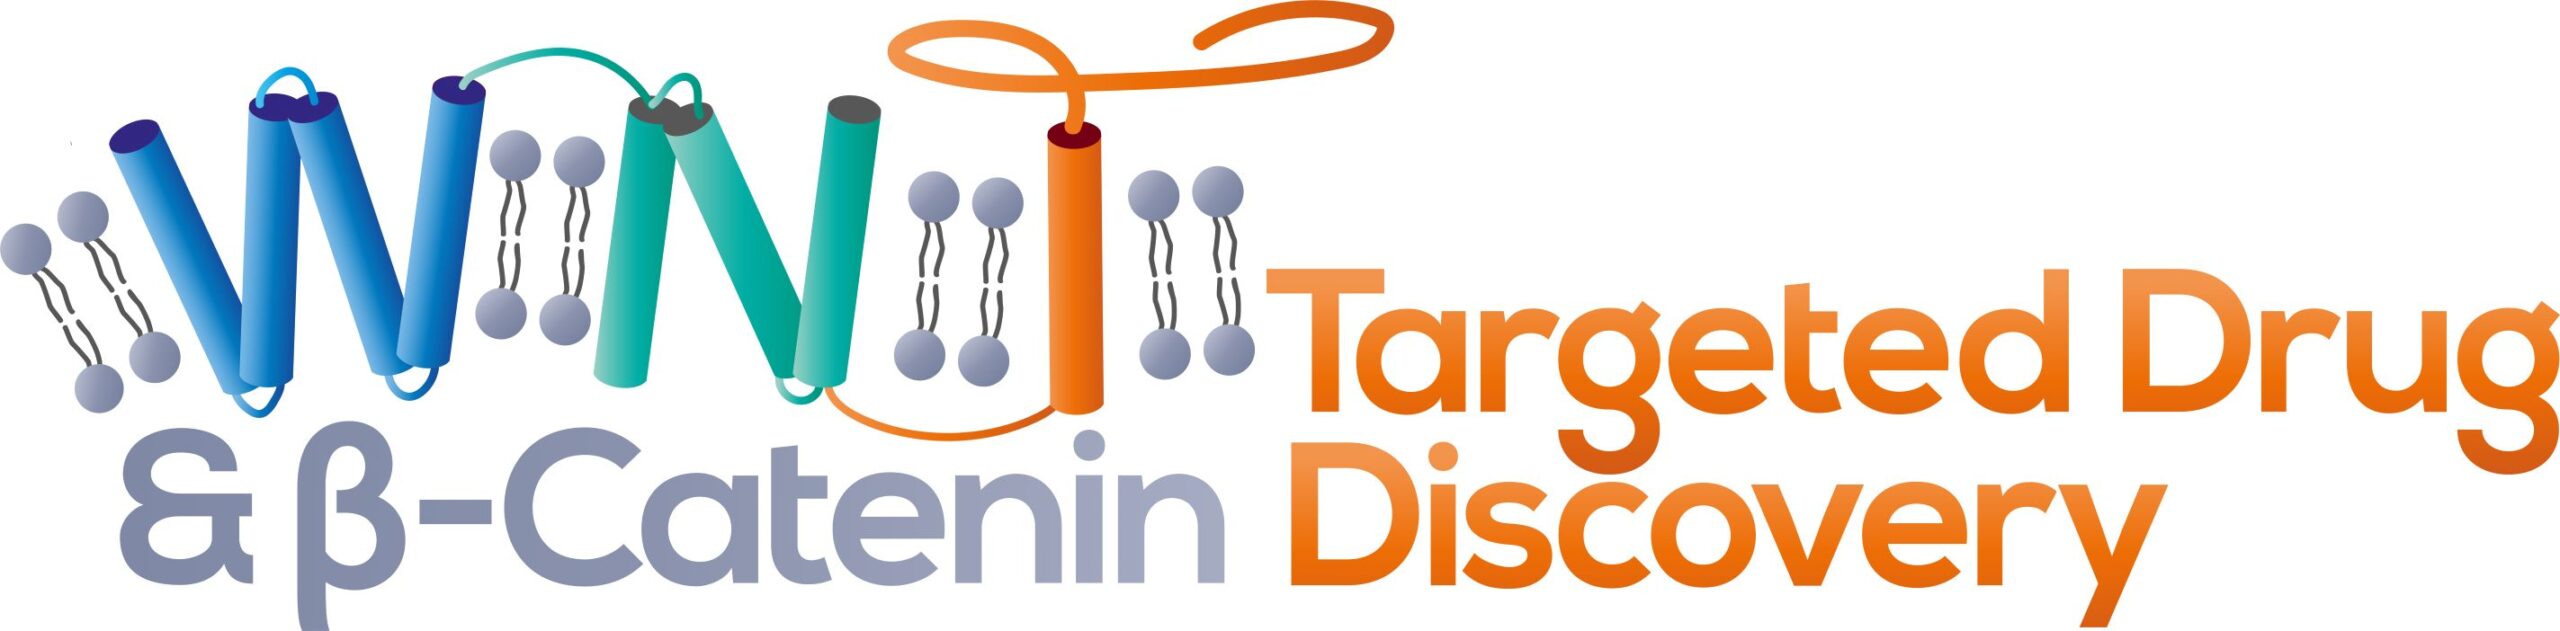 Wnt & B-Catenin Targeted Drug Discovery Summit logo2